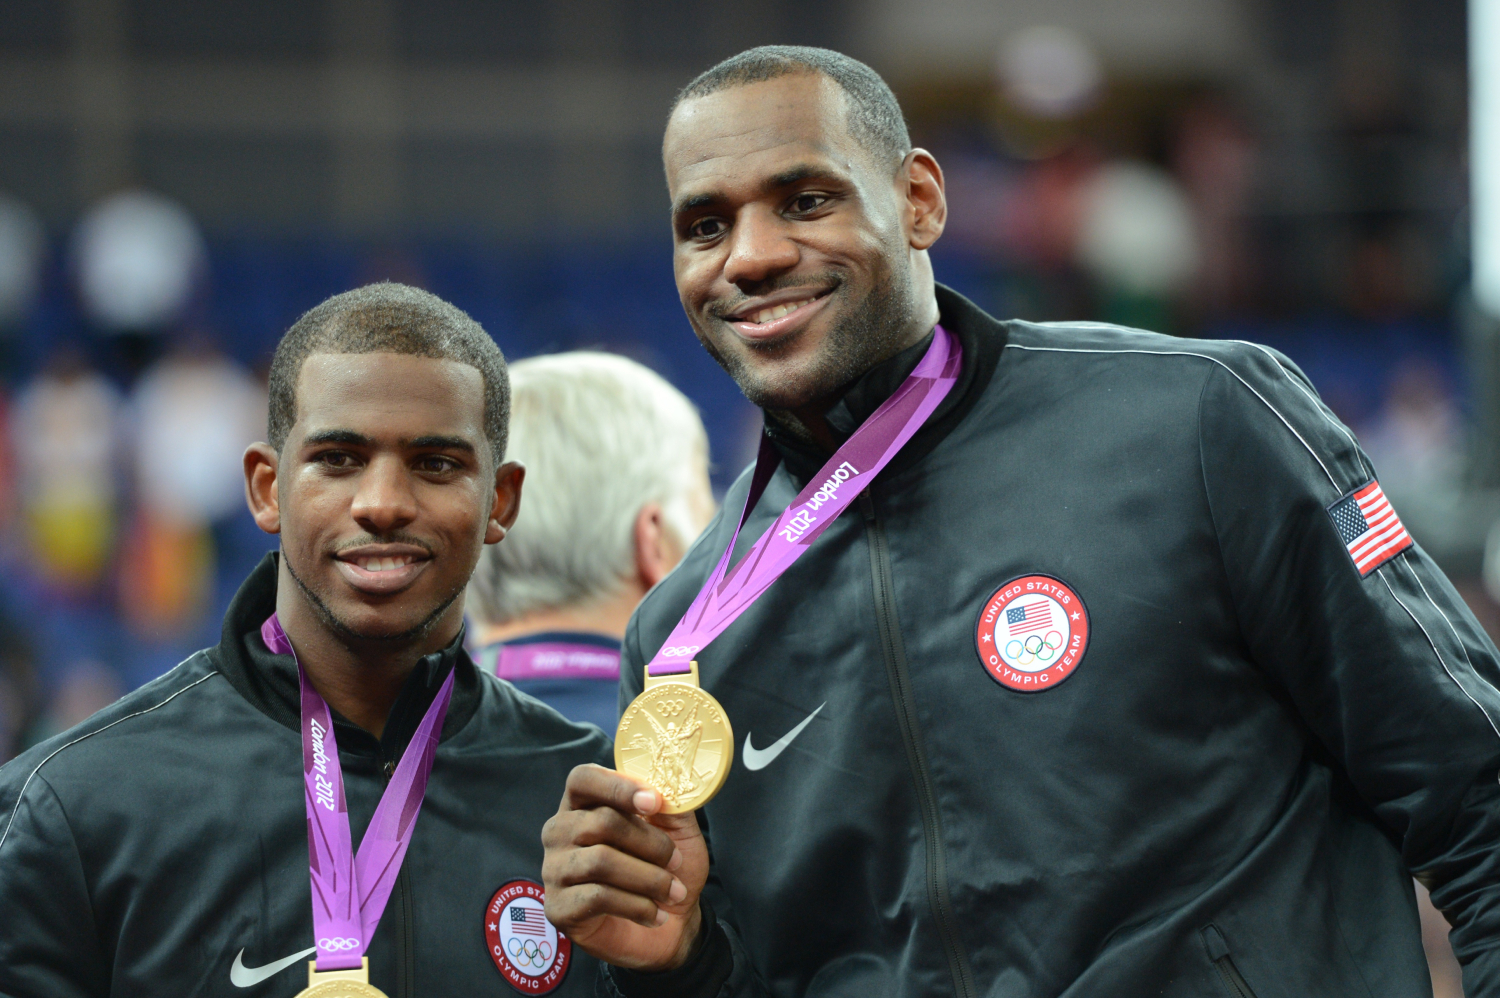 Chris Paul Reportedly Has No Interest in Teaming up With LeBron James on the Lakers